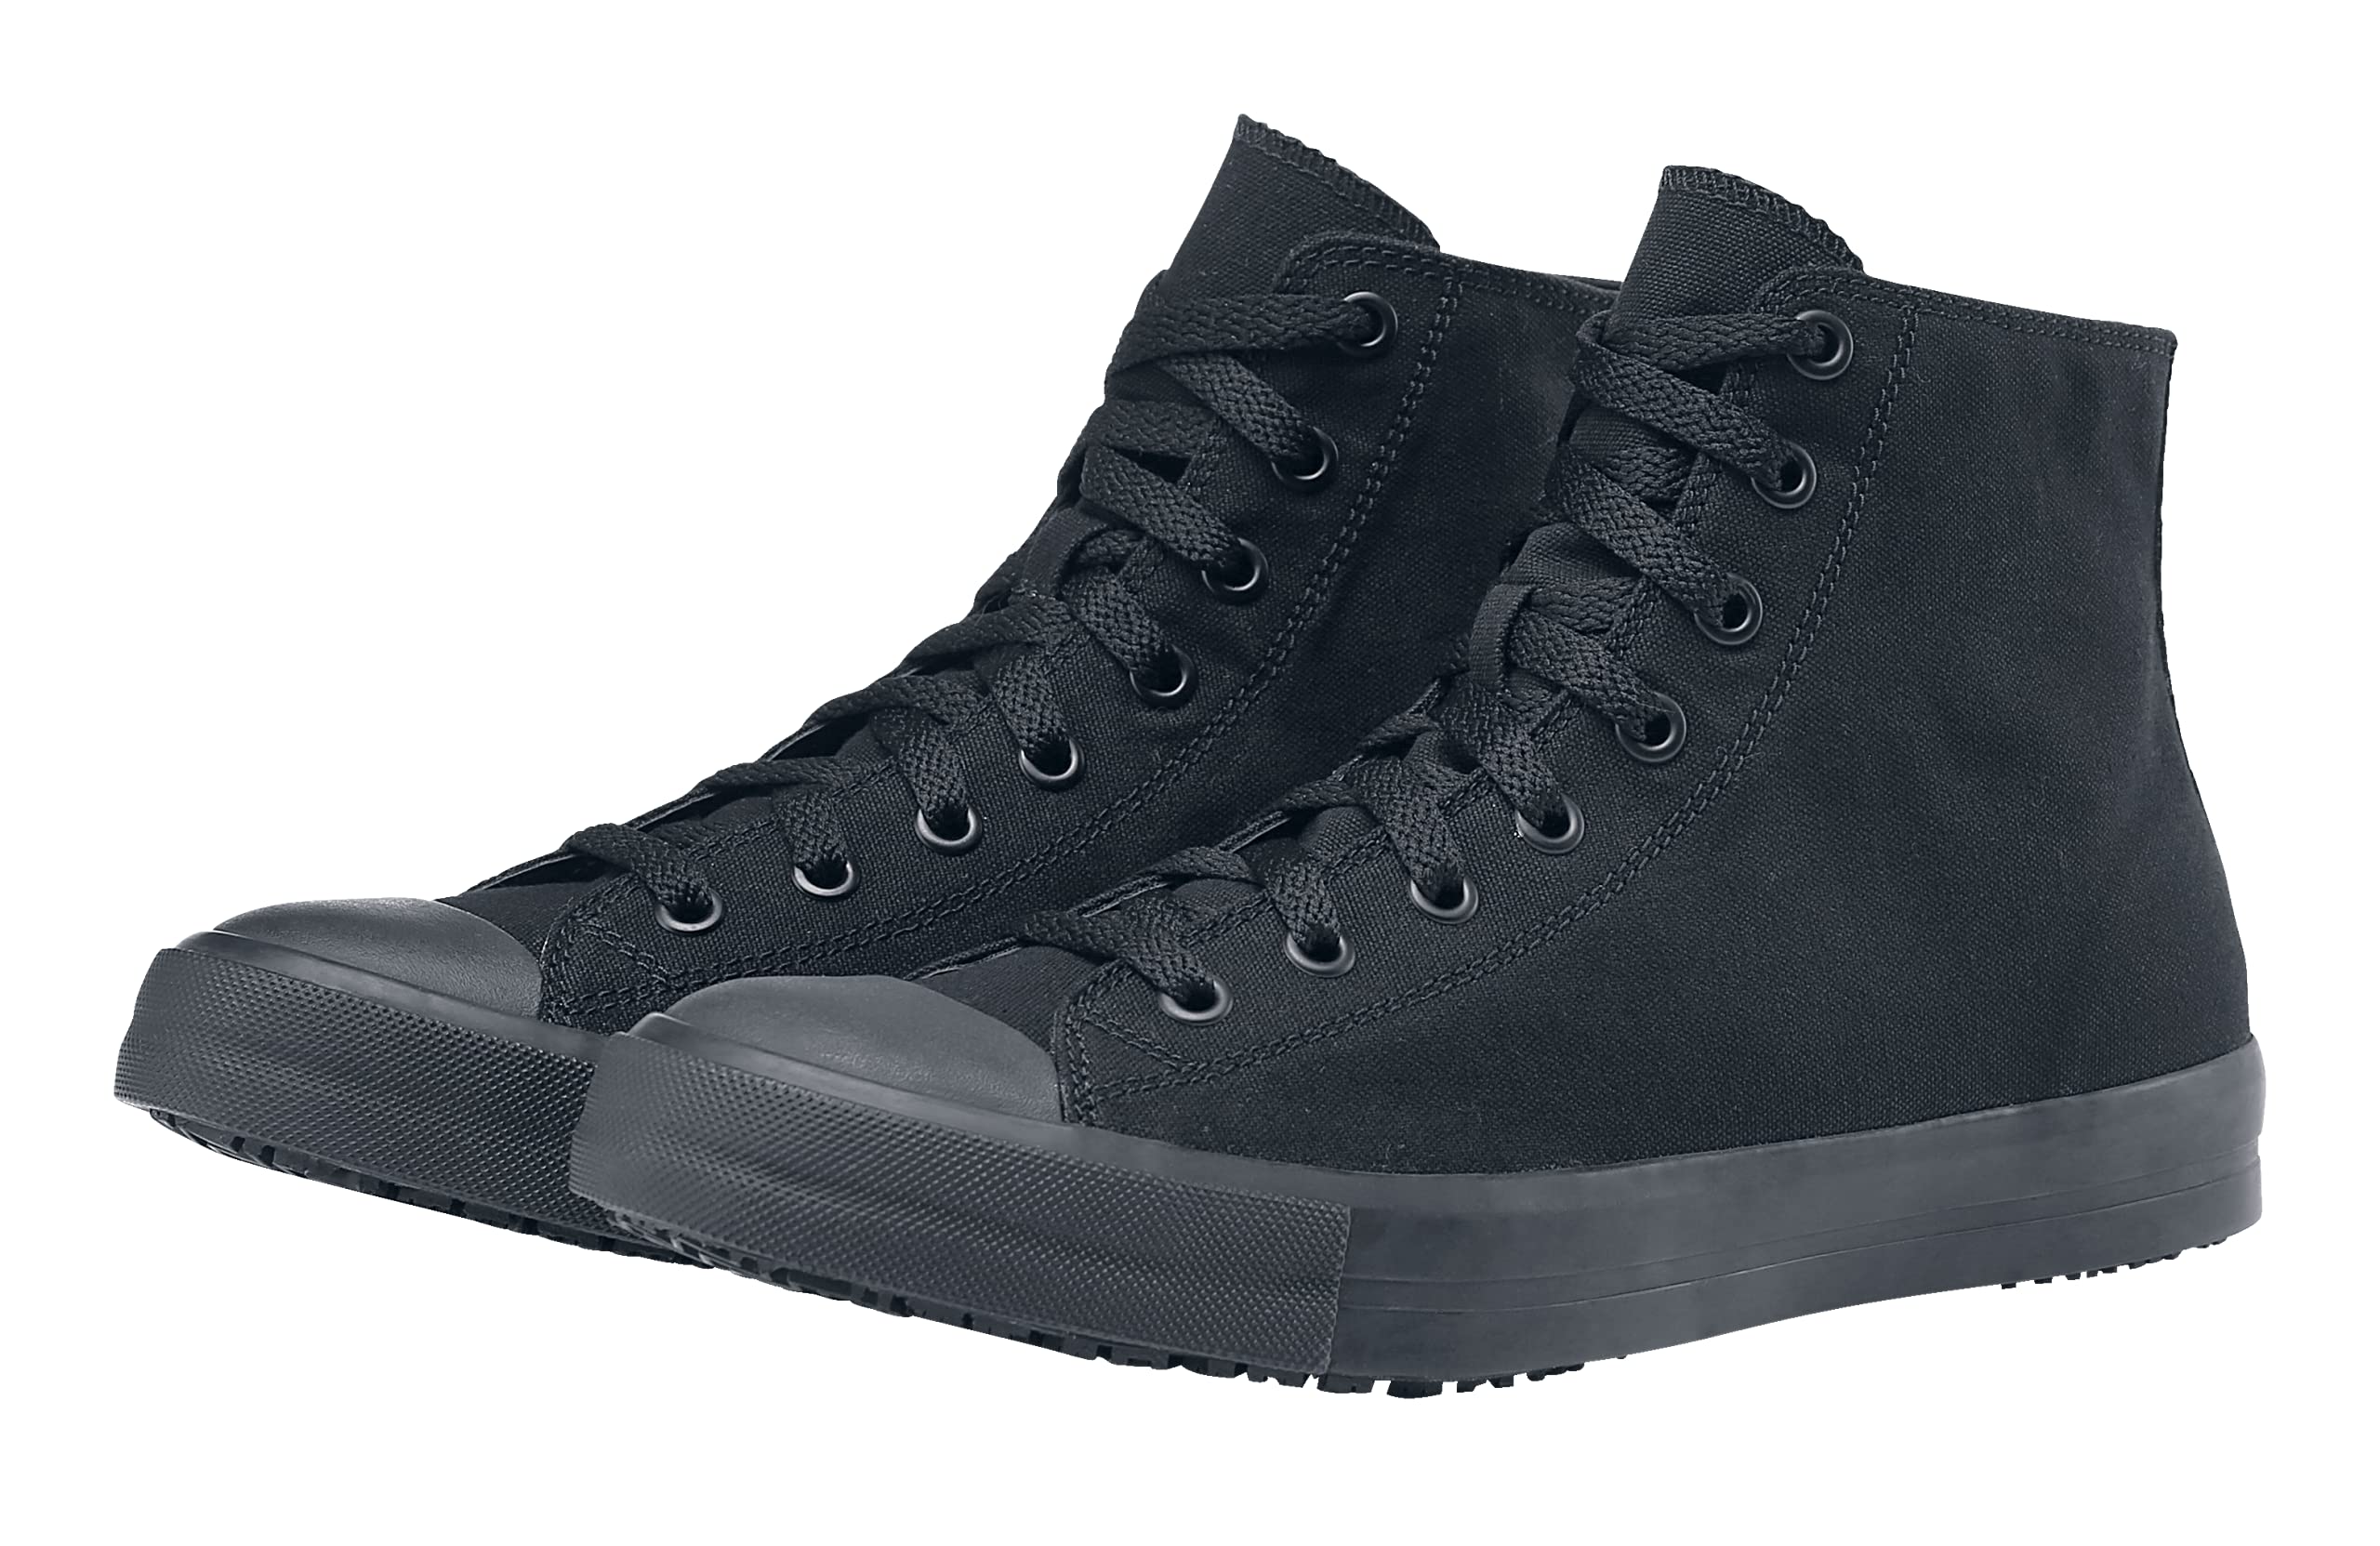 Shoes for Crews Pembroke, Men's Women's,Unisex, Slip Resistant, High Top Work Sneakers, Leather or Canvas